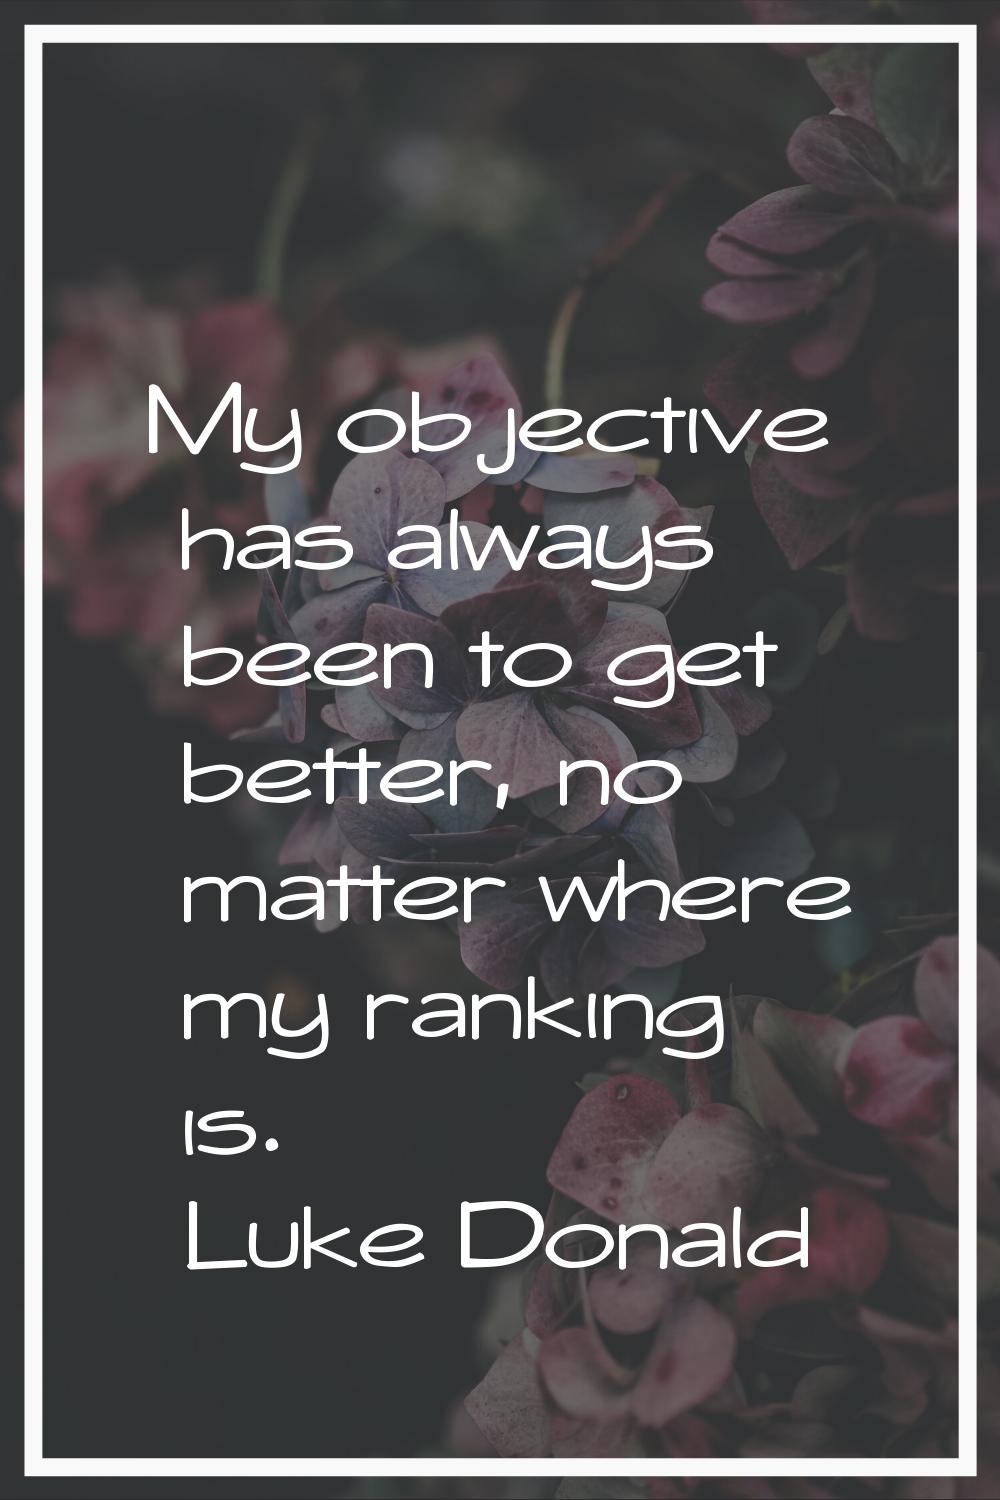 My objective has always been to get better, no matter where my ranking is.